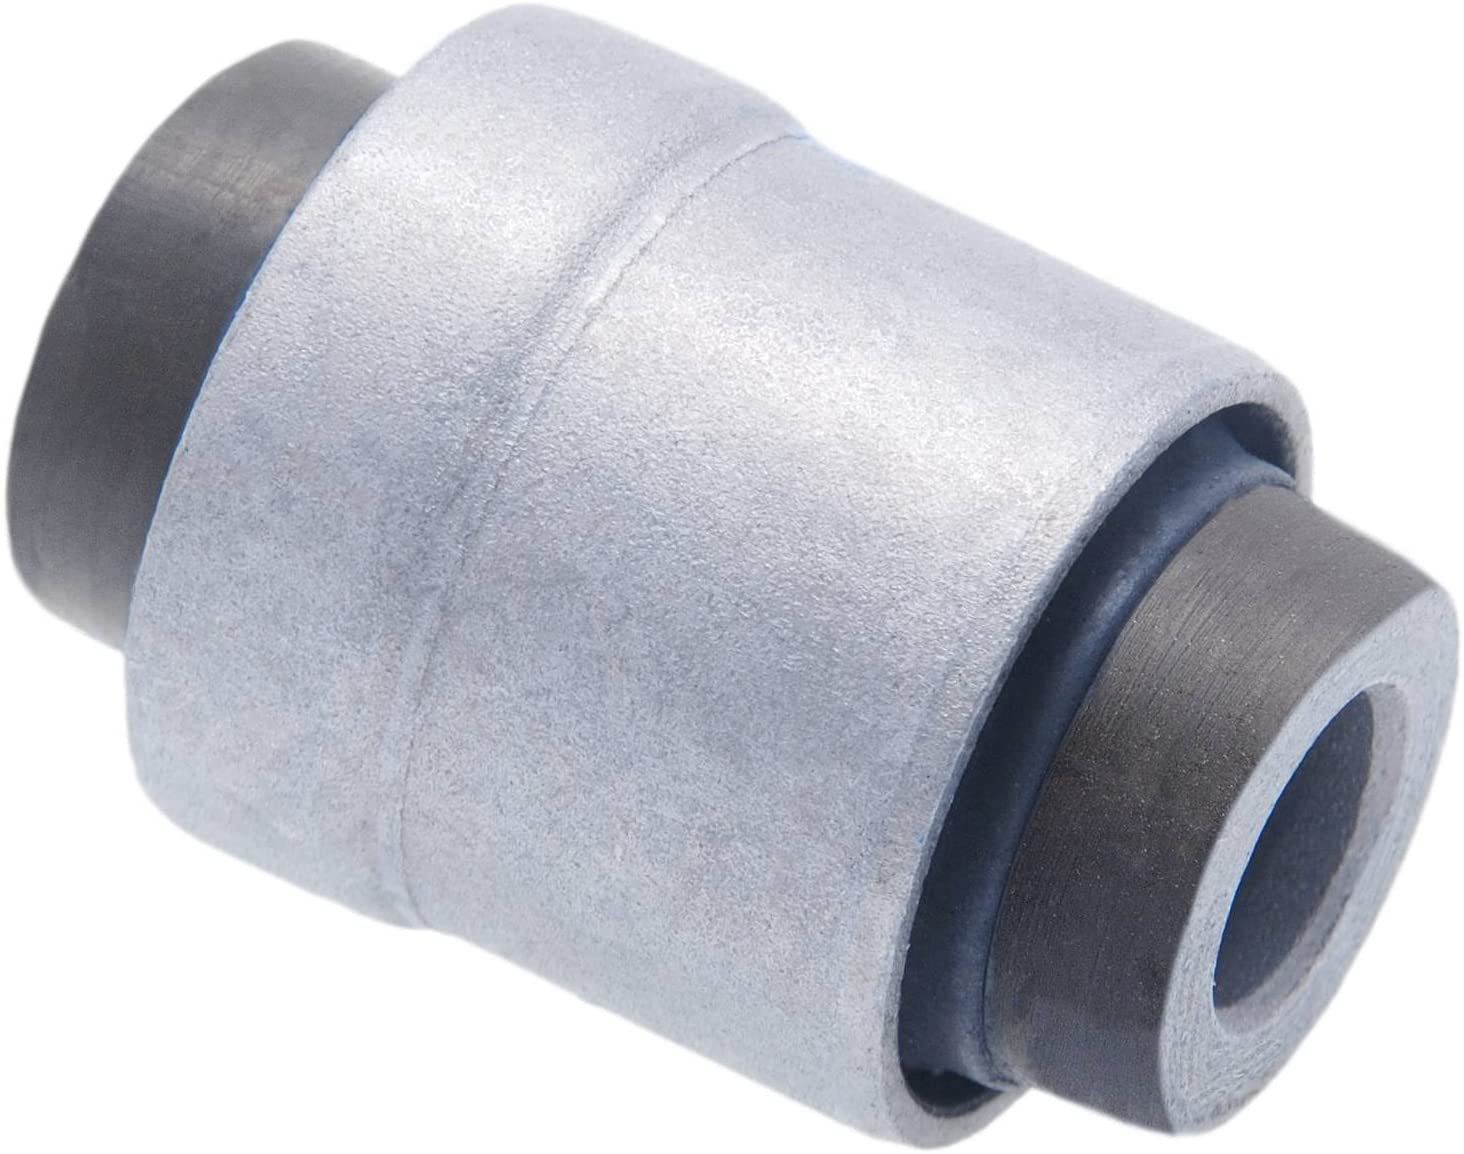 551B01La0A - Arm Bushing (for the Rear Lower Control Arm) For Nissan